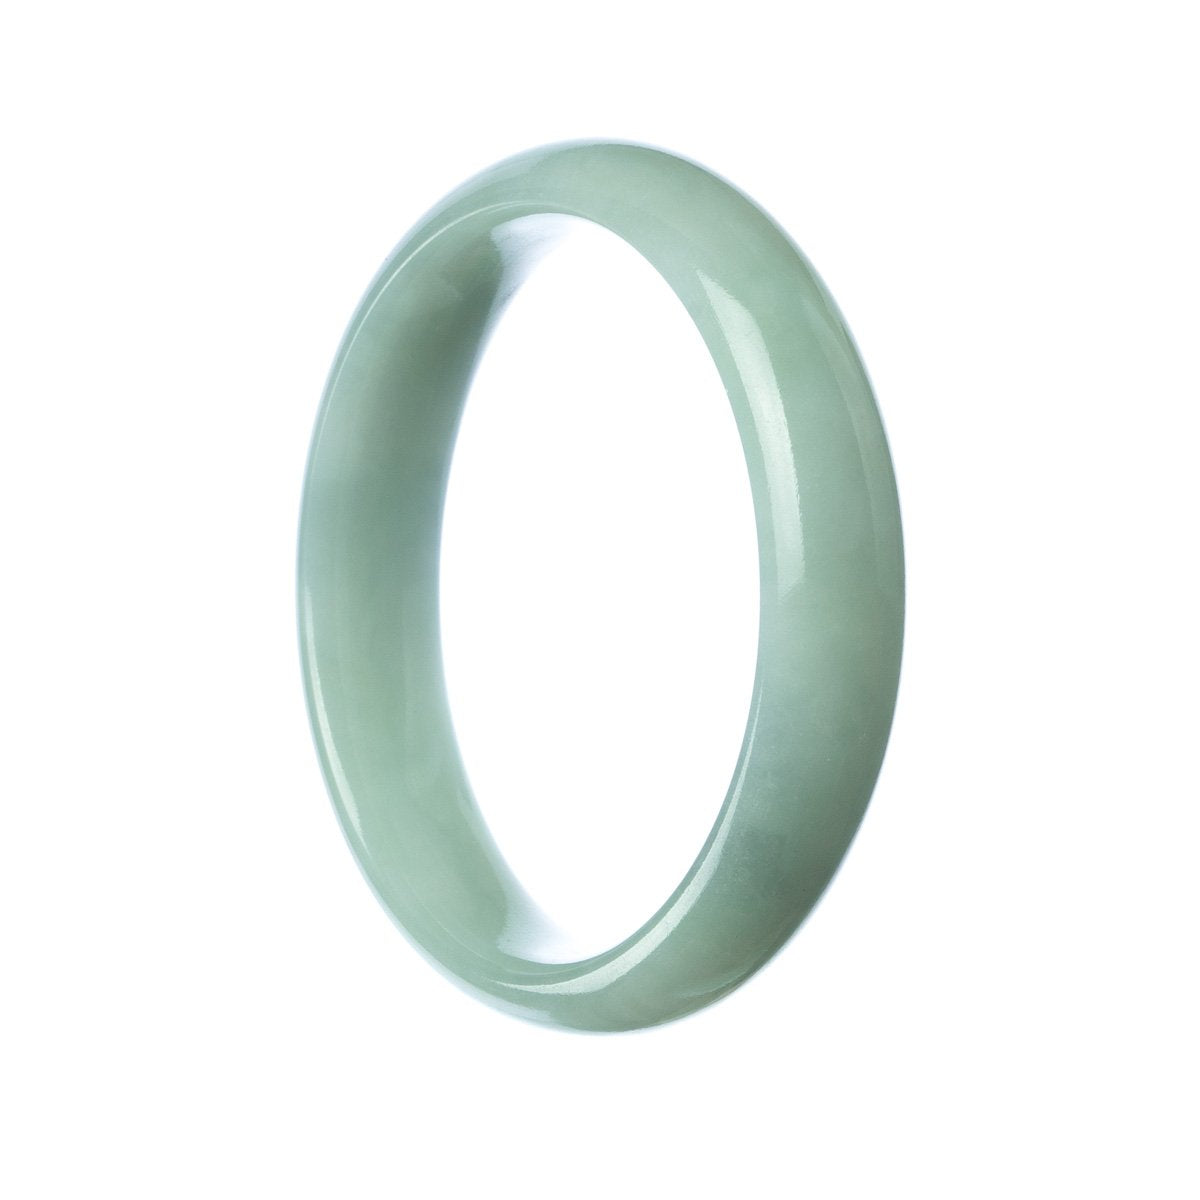 A close-up photo of a stunning pale green Burma jade bracelet, crafted with Real Grade A jade. The bracelet features a 57mm half moon shape, exuding elegance and sophistication. Handcrafted by MAYS™, this beautiful piece is sure to add a touch of luxury to any outfit.